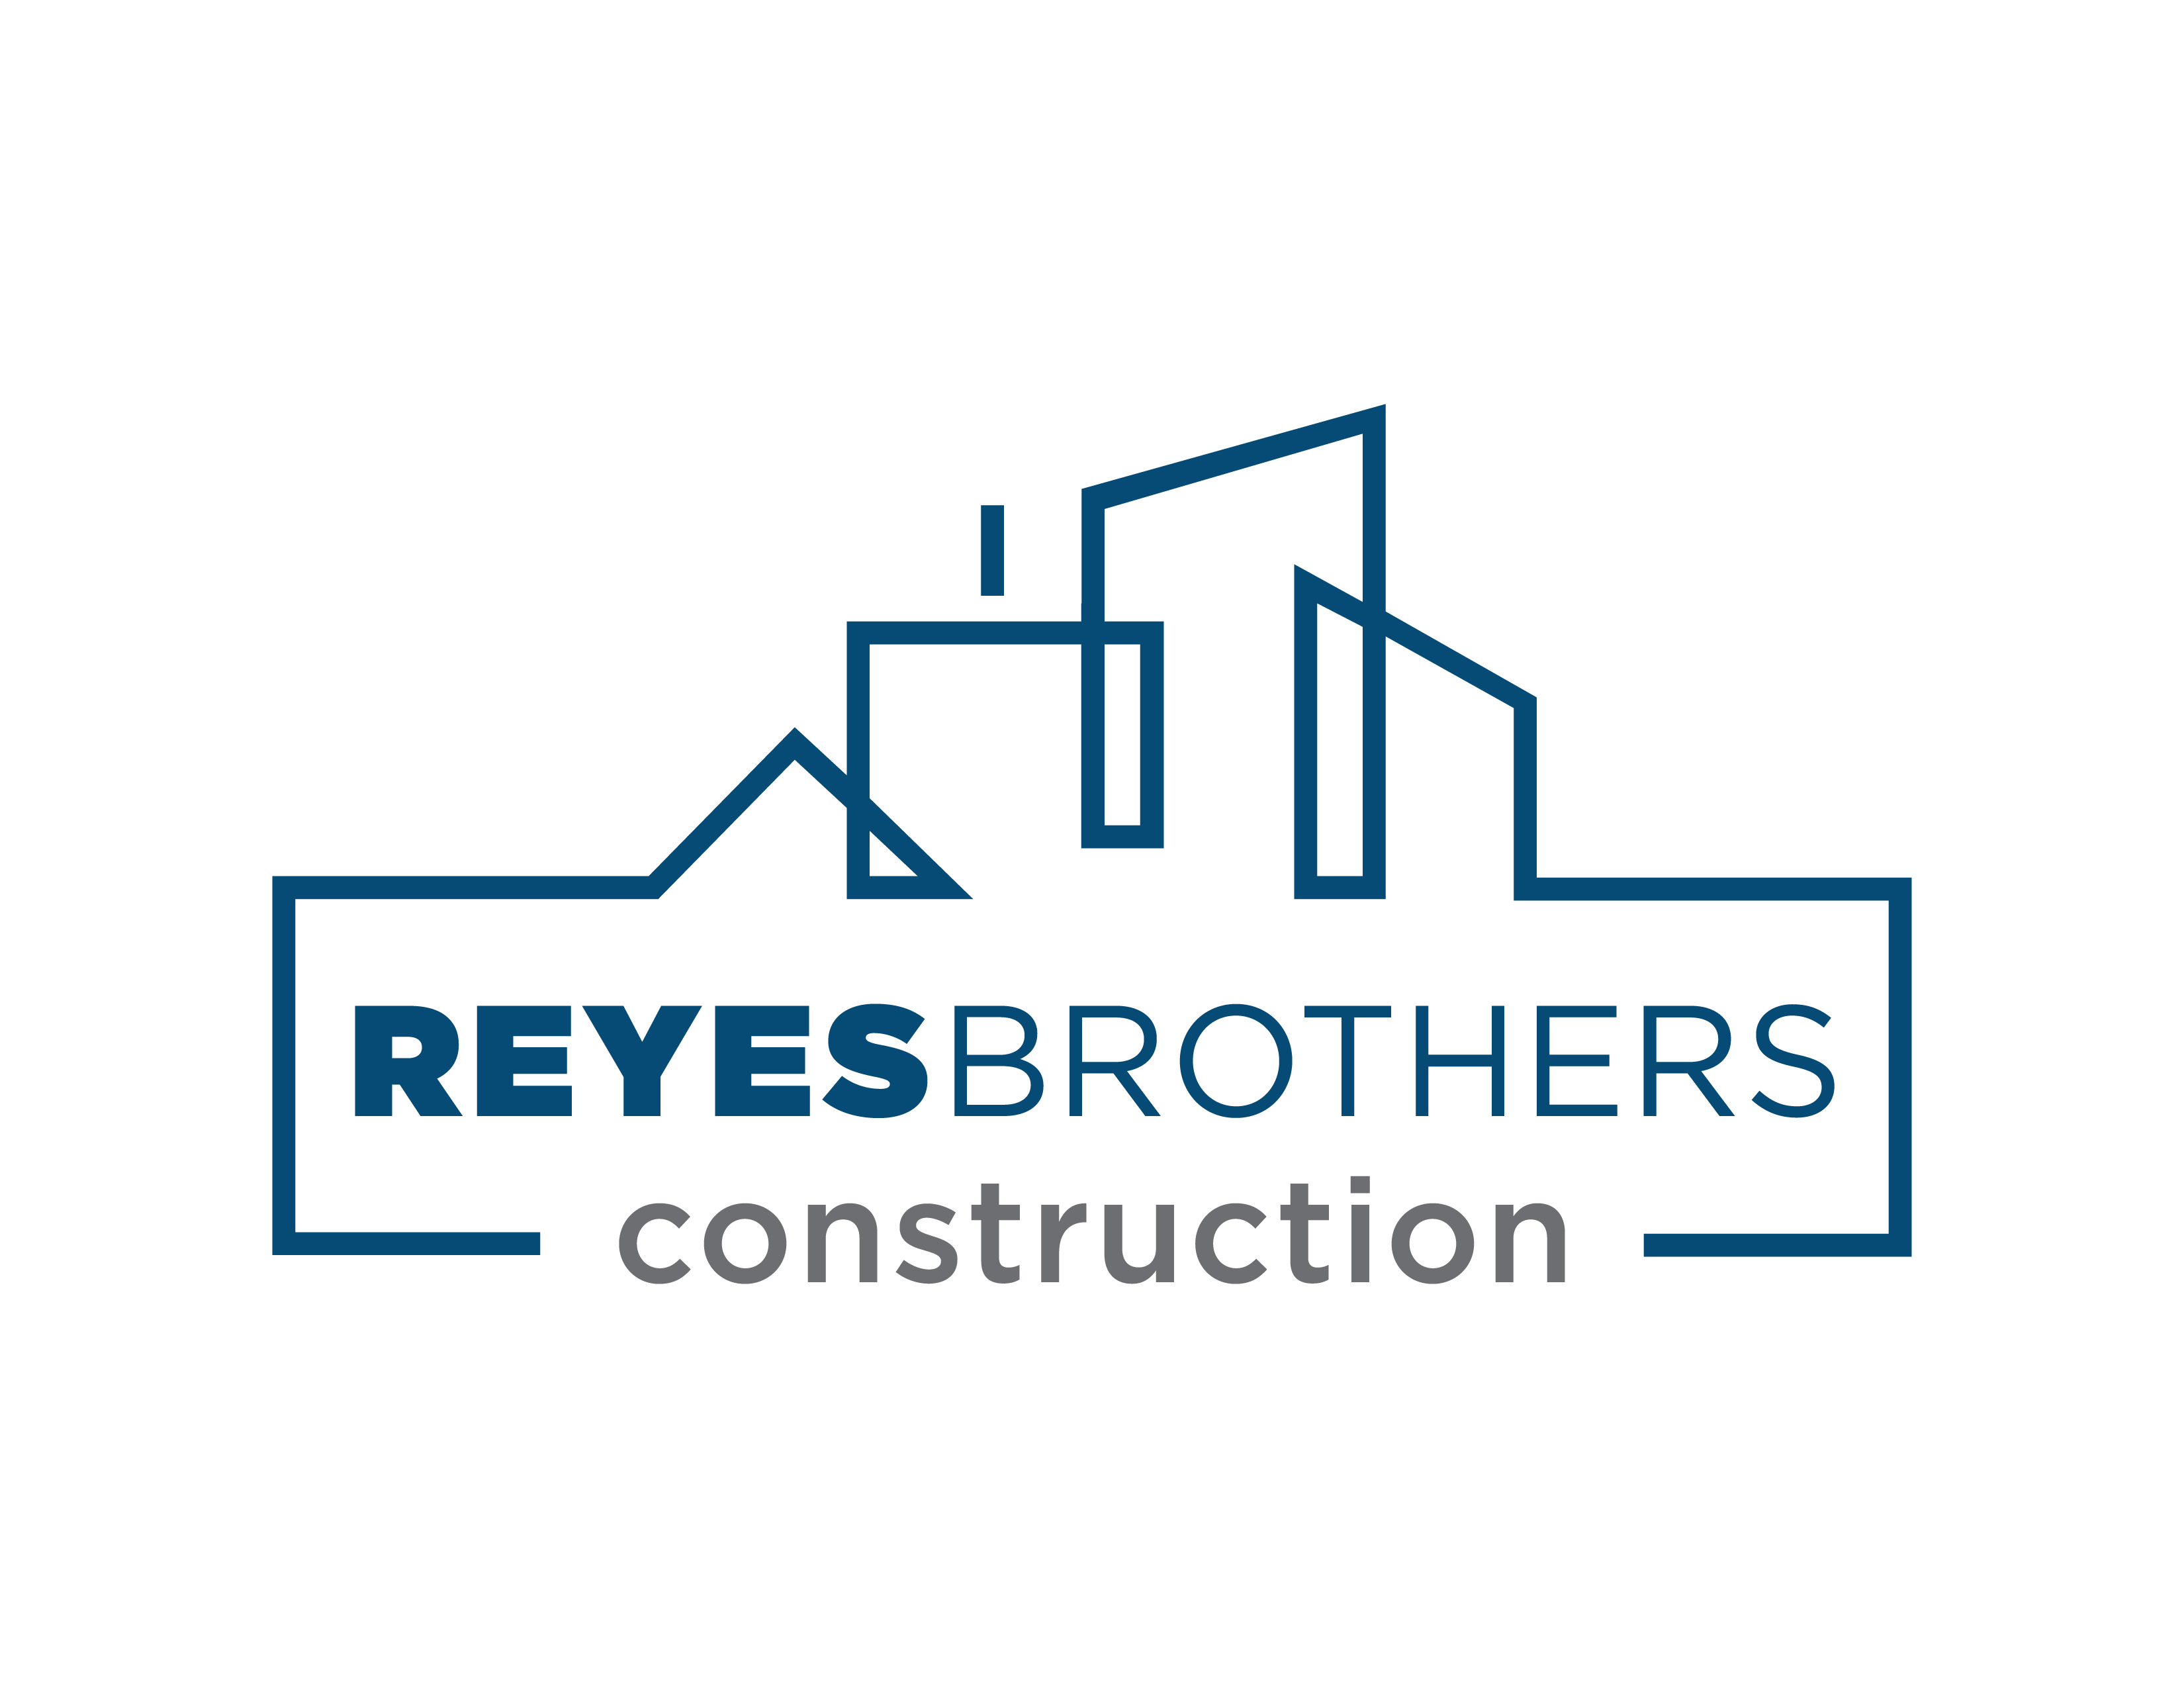 Reyes Brothers Construction logo